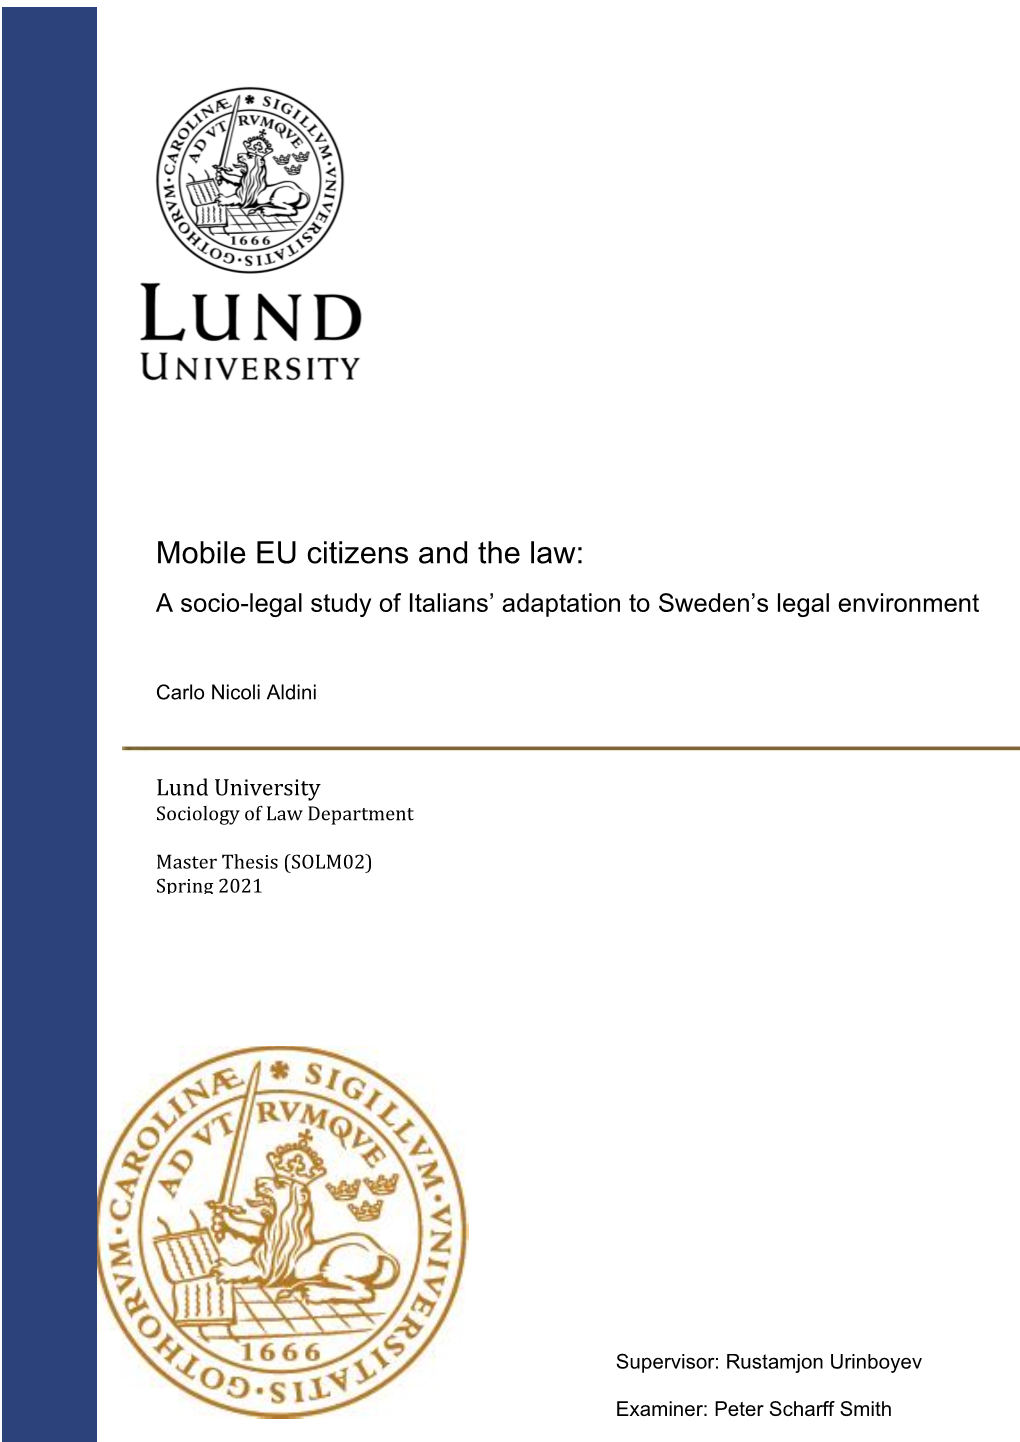 Mobile EU Citizens and the Law